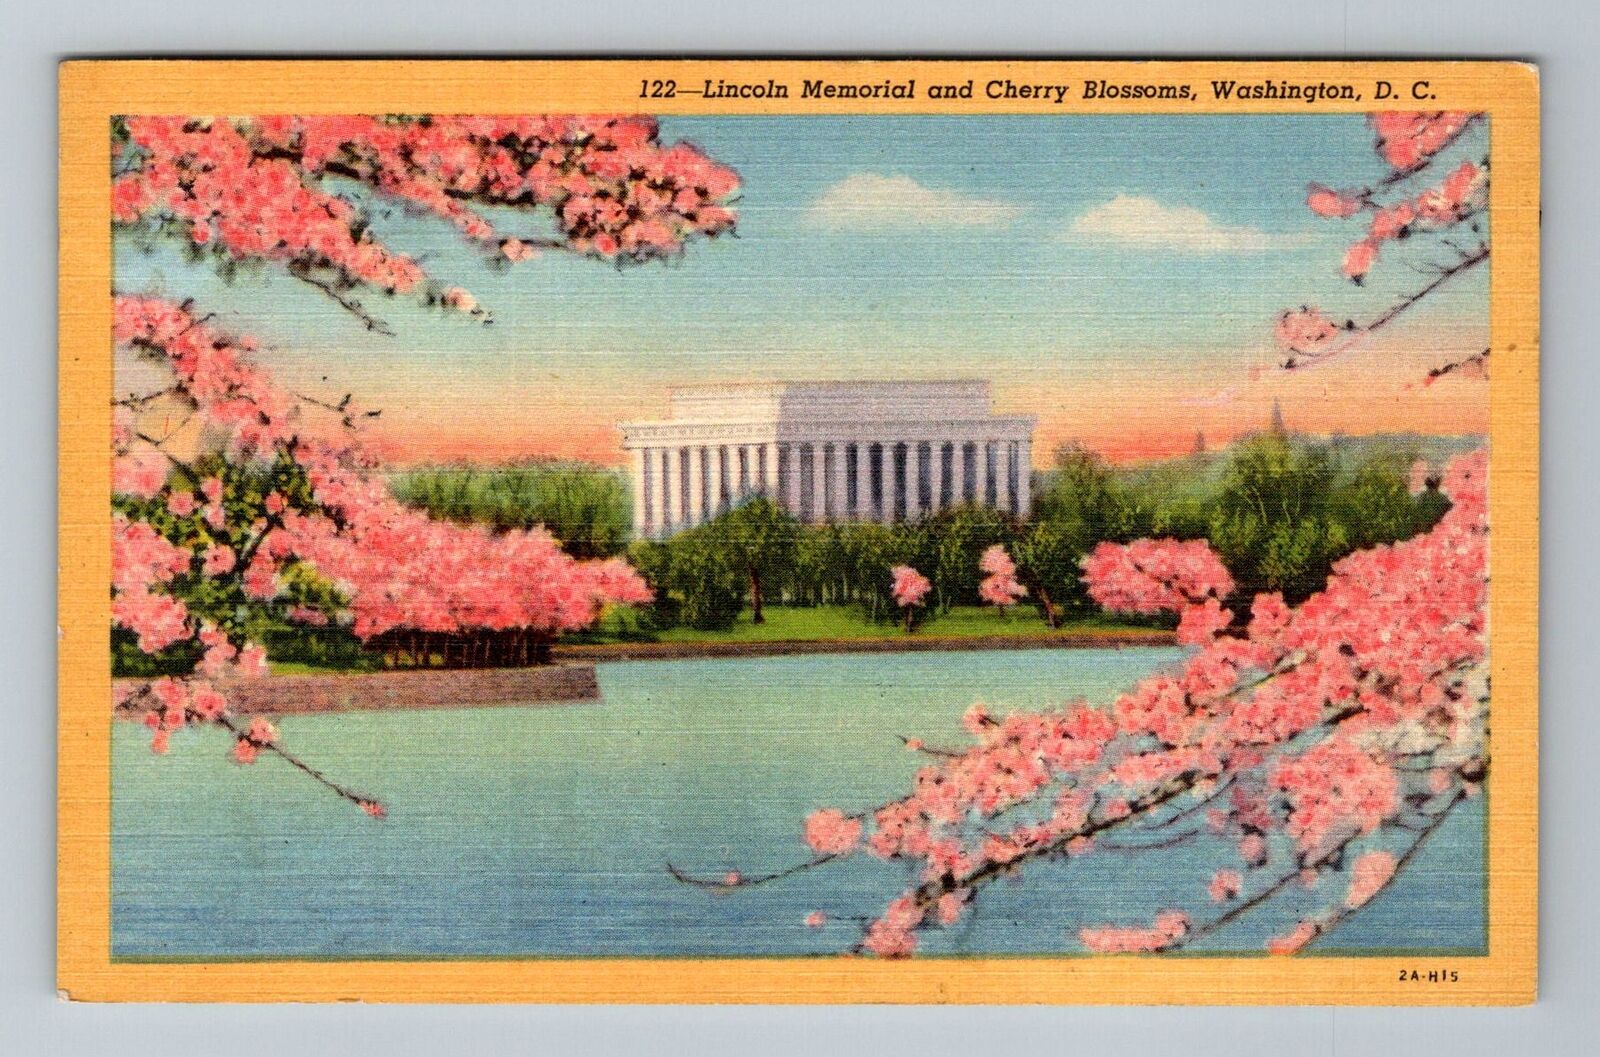 Washington D.C. Blooming Cherry Blossoms Lincoln Memorial Vintage Postcard